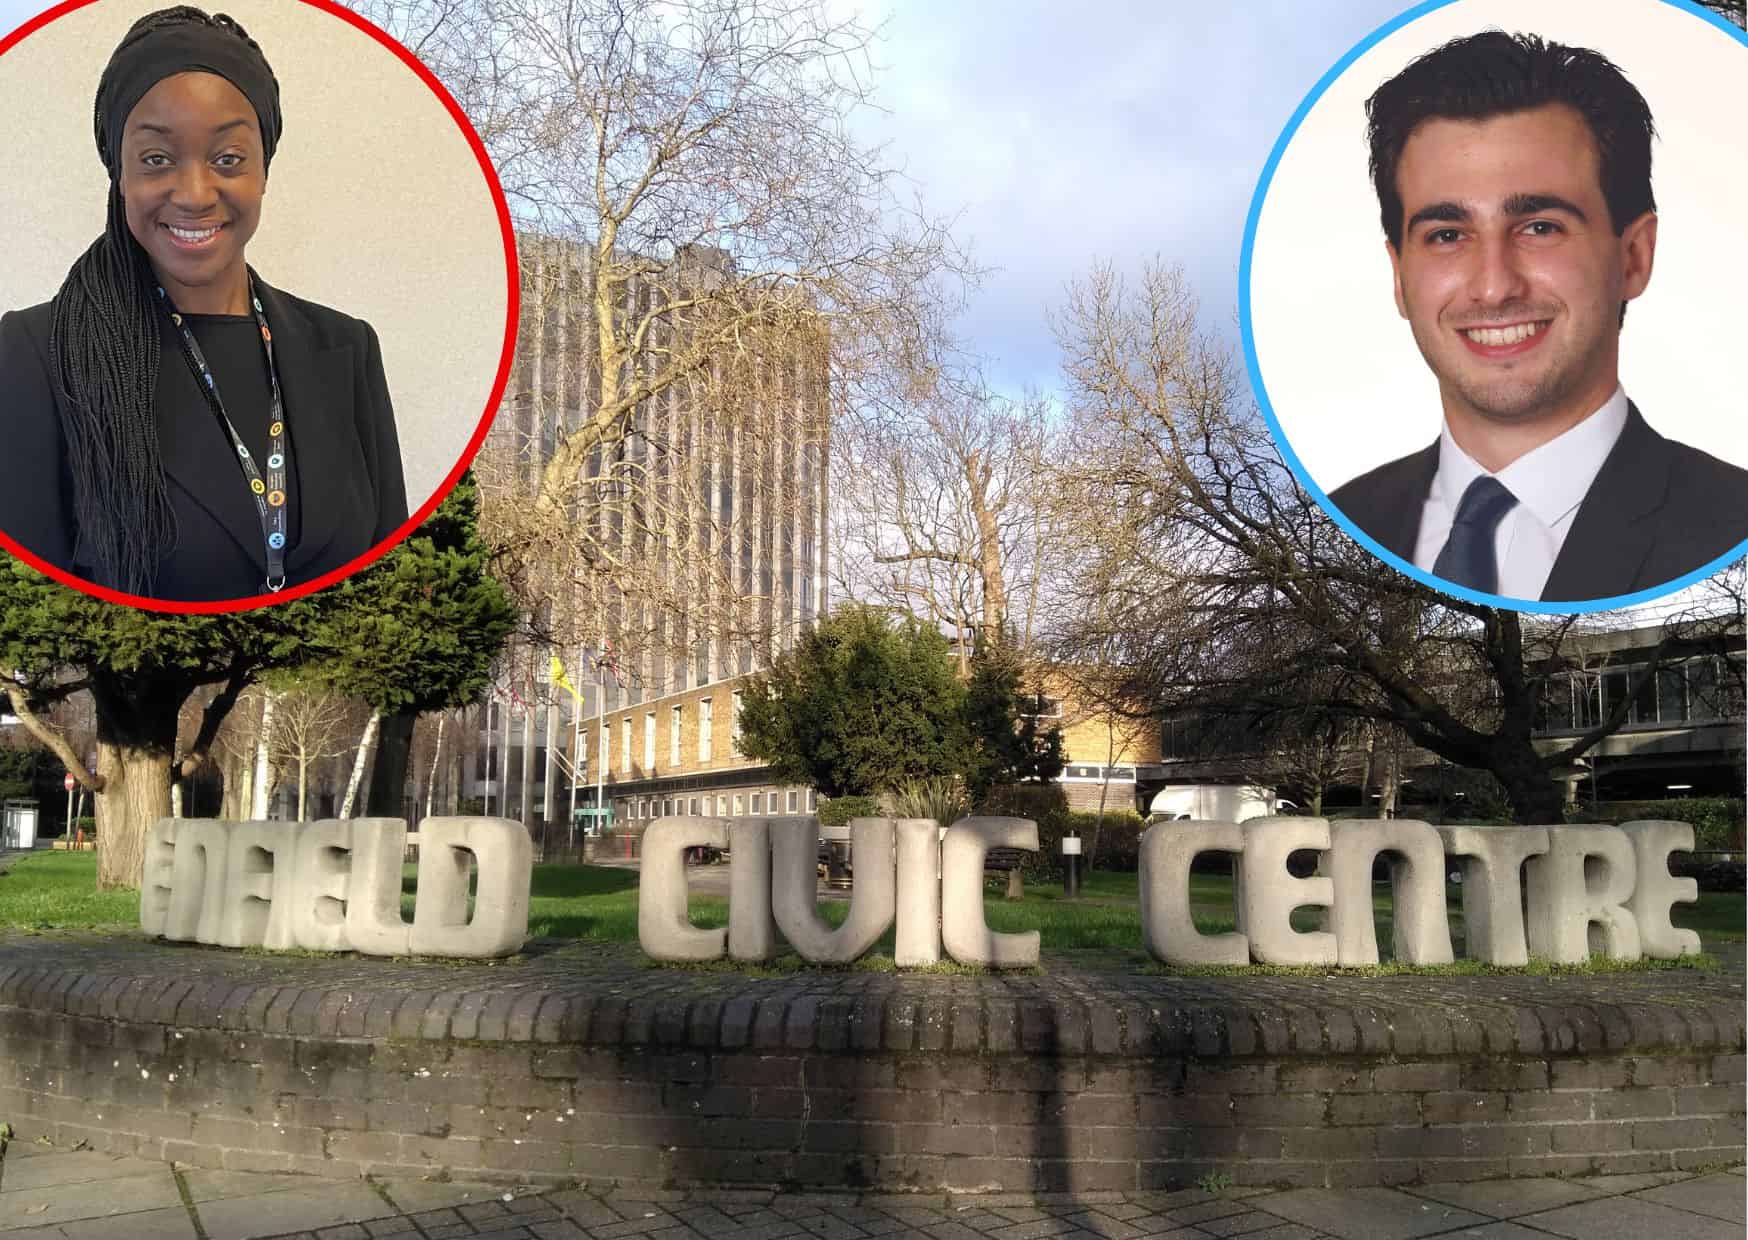 Enfield Civic Centre and (inset, left) cabinet member Chinelo Anyanwu and (inset, right) Conservative group leader Alessandro Georgiou